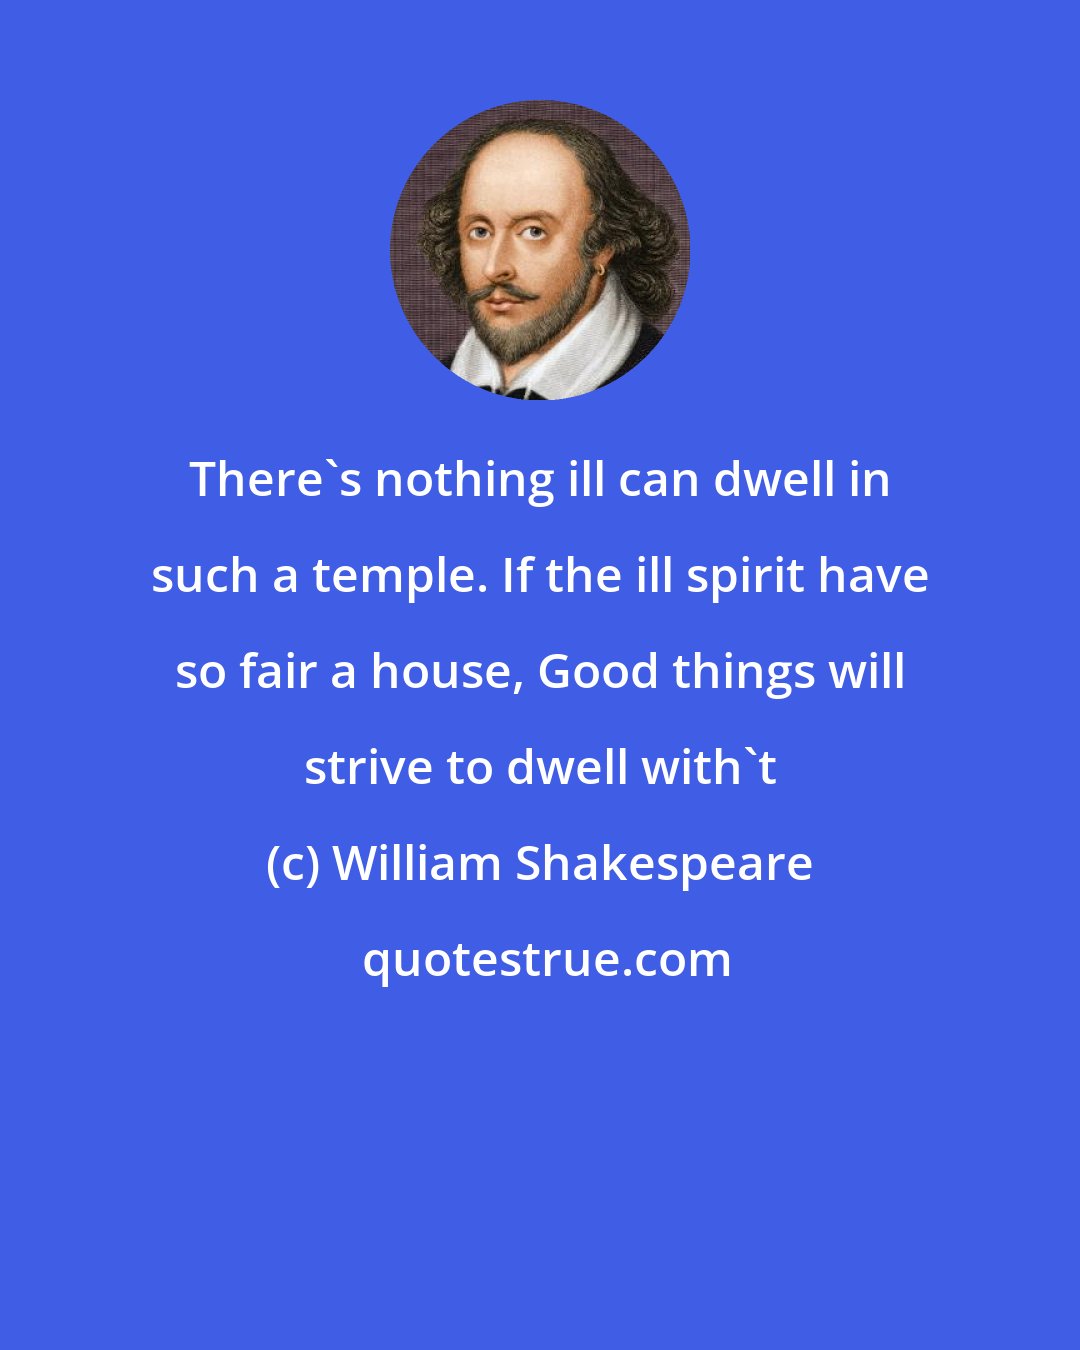 William Shakespeare: There's nothing ill can dwell in such a temple. If the ill spirit have so fair a house, Good things will strive to dwell with't